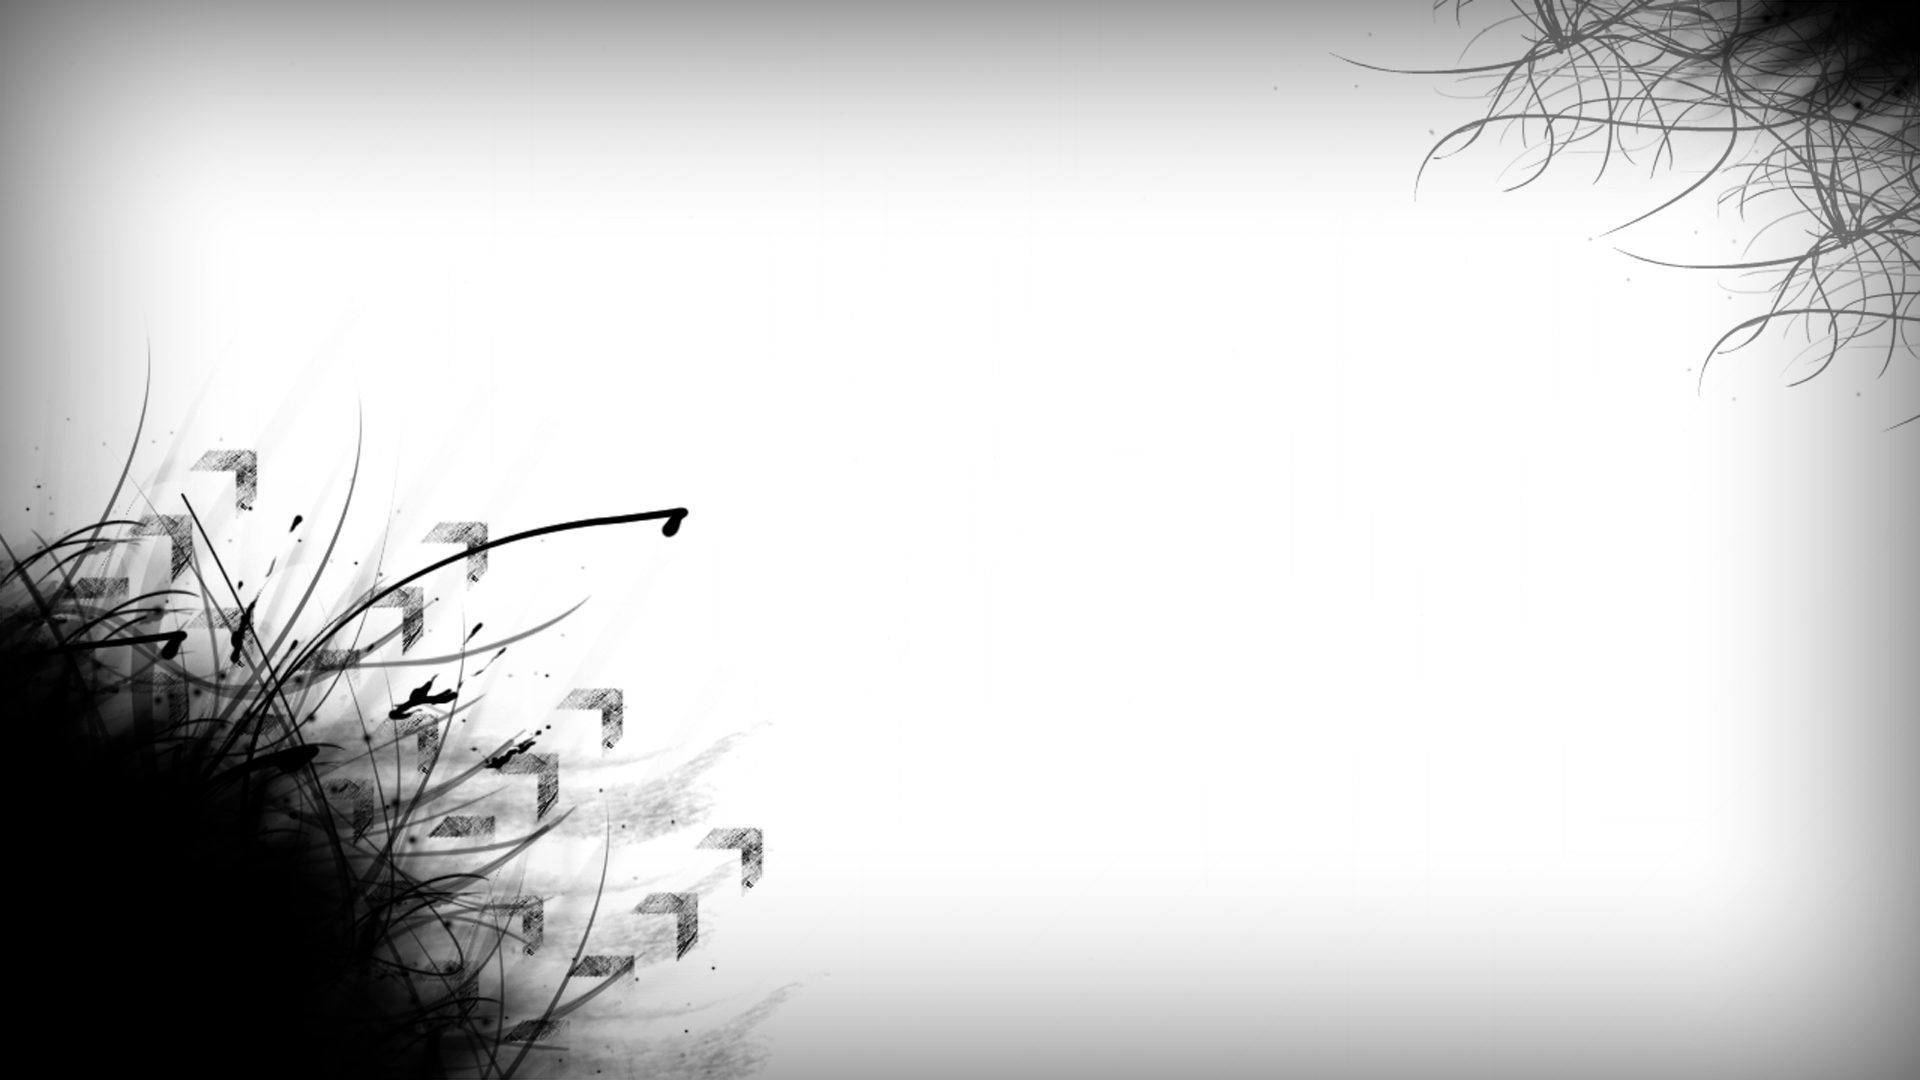 HD Black And White Wallpaper For Free Download (Resolution 1080p)